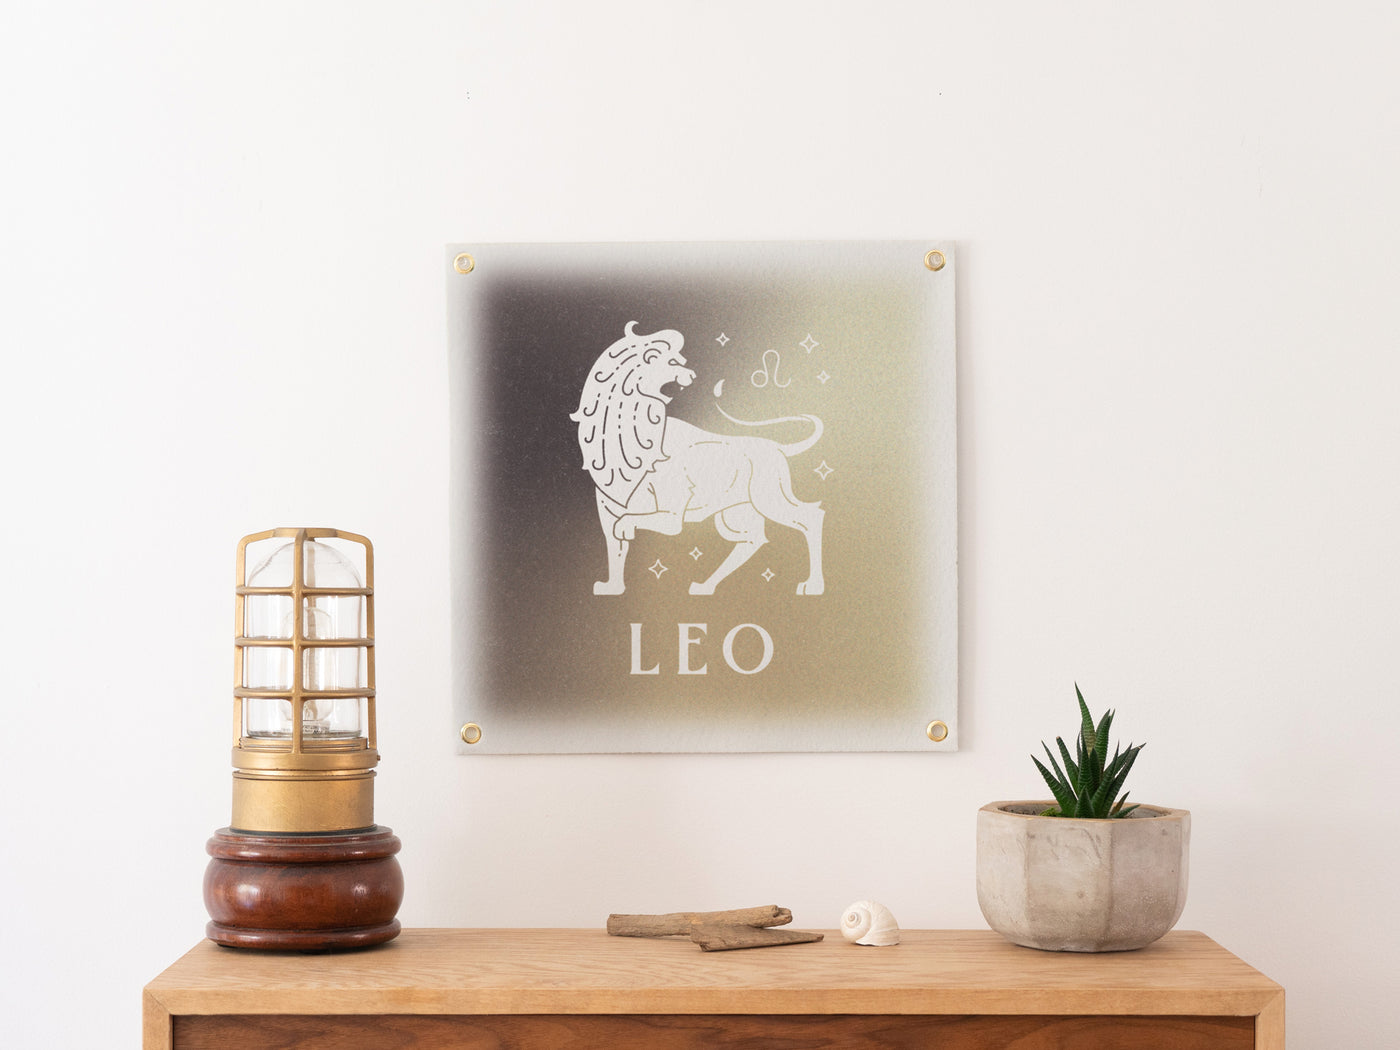 Leo July 23 - August 22